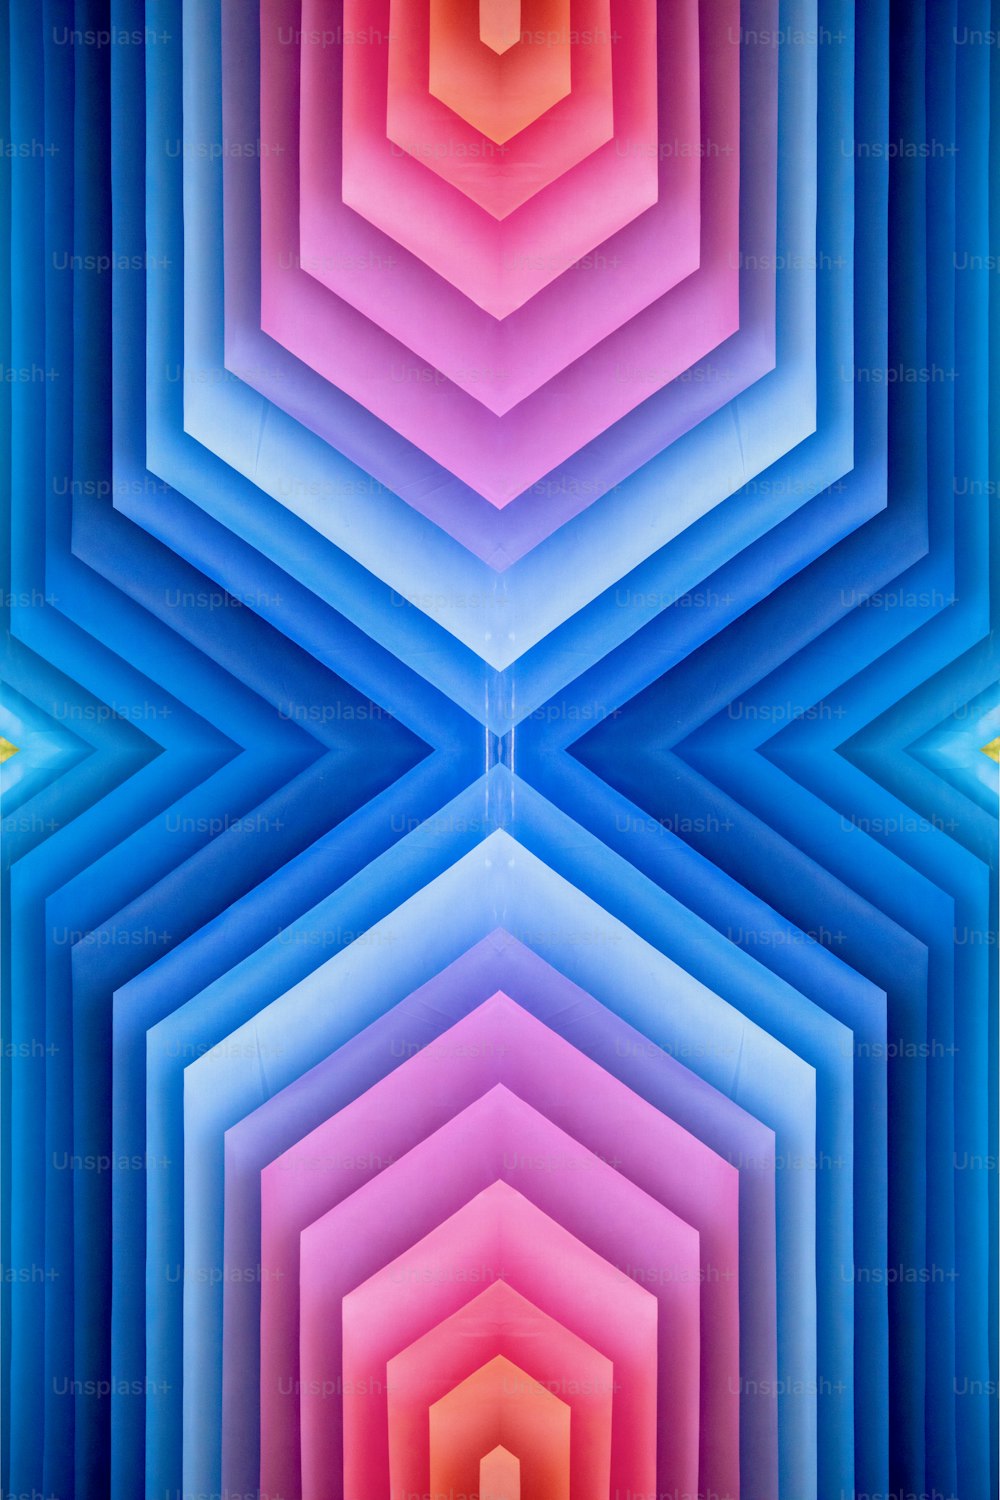 an abstract image of a multicolored hexagonal structure